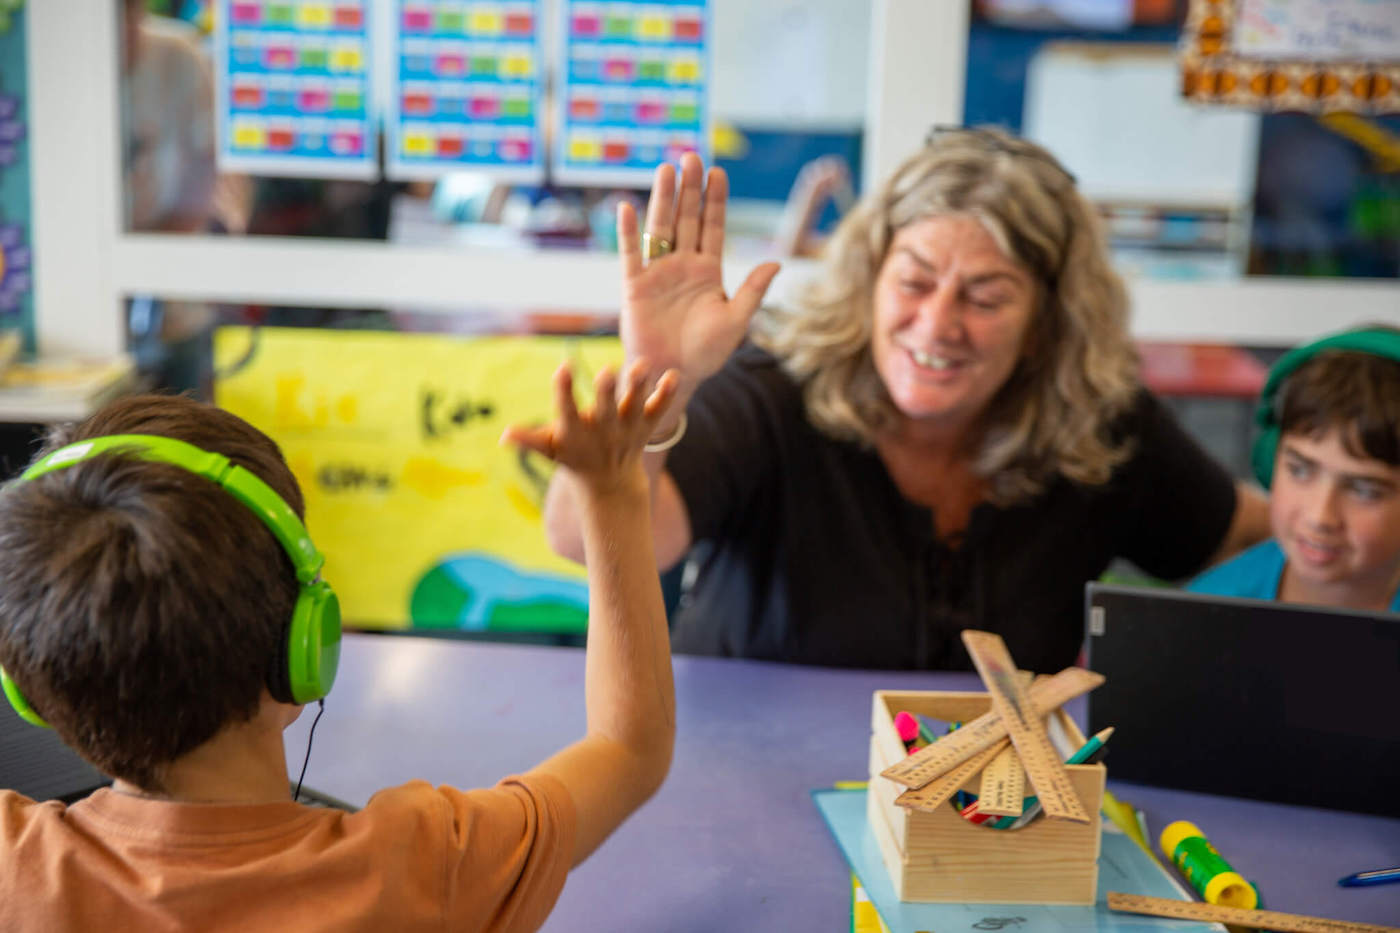 A teacher is giving a high five to a child in a classroom